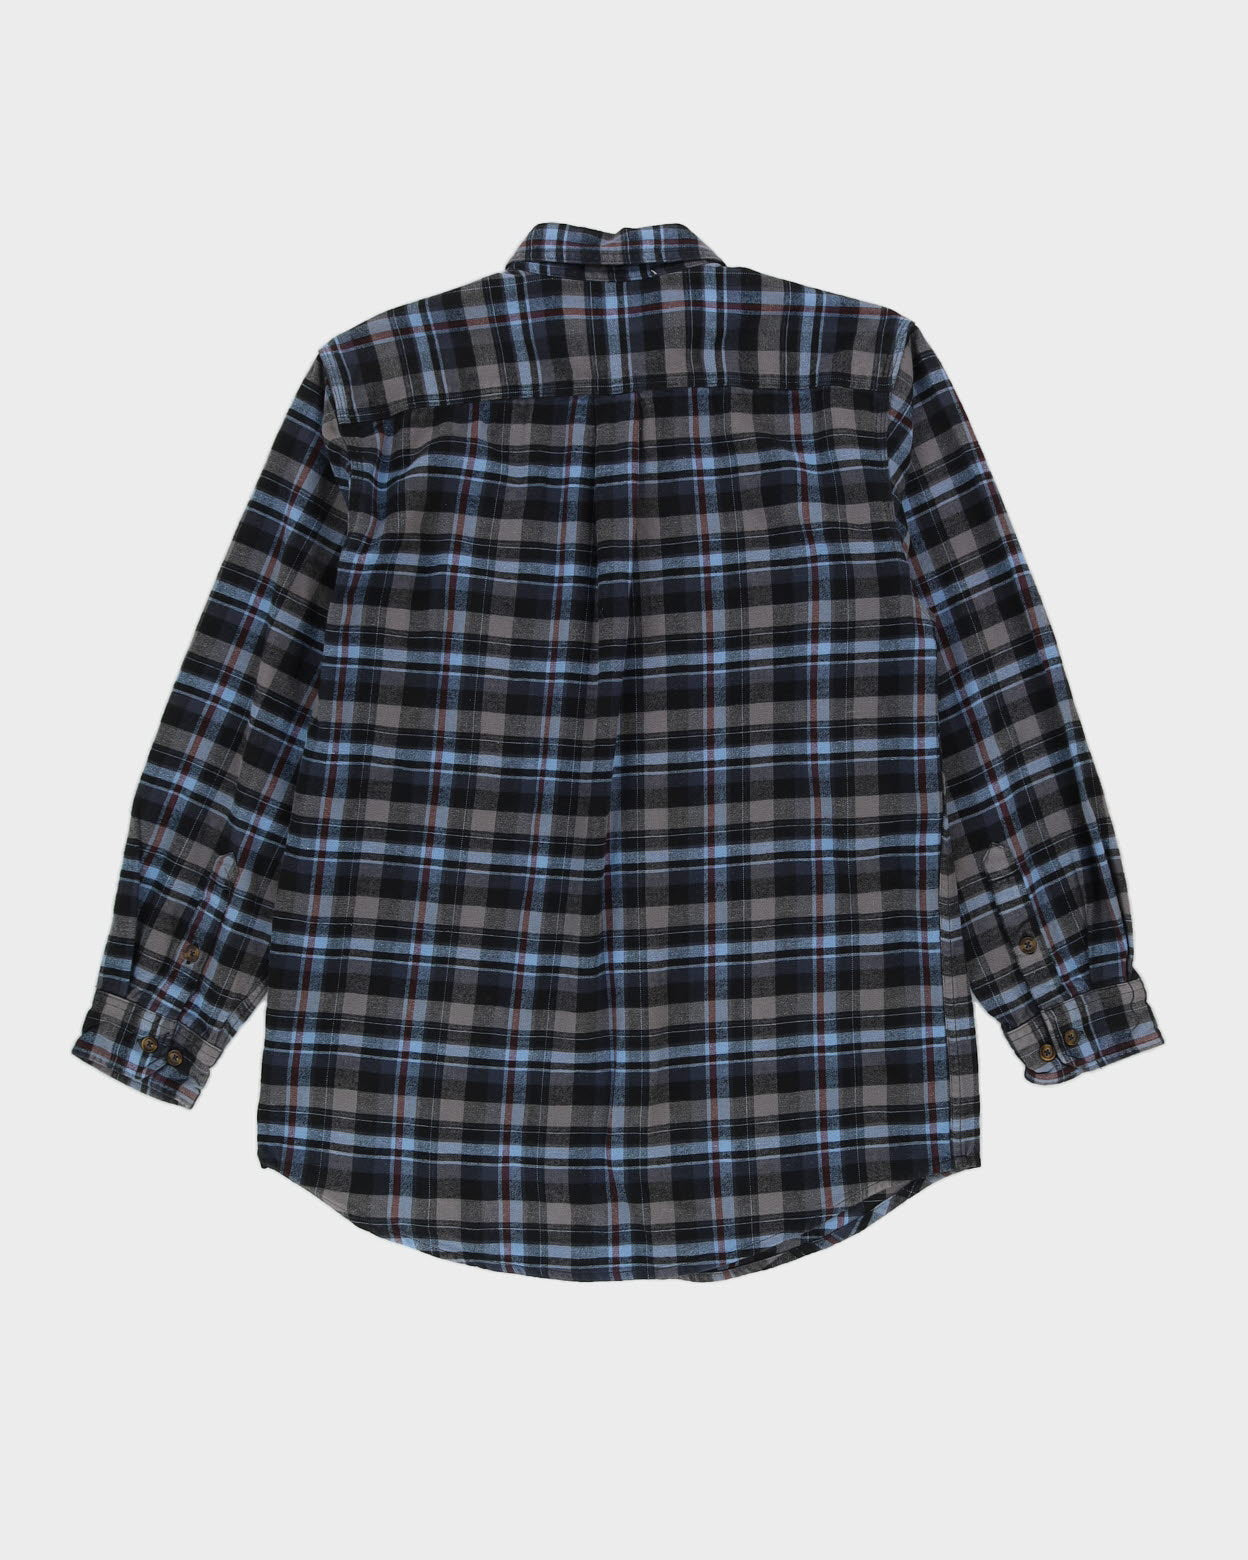 Carhartt Blue Check Patterned Flannel Shirt - L